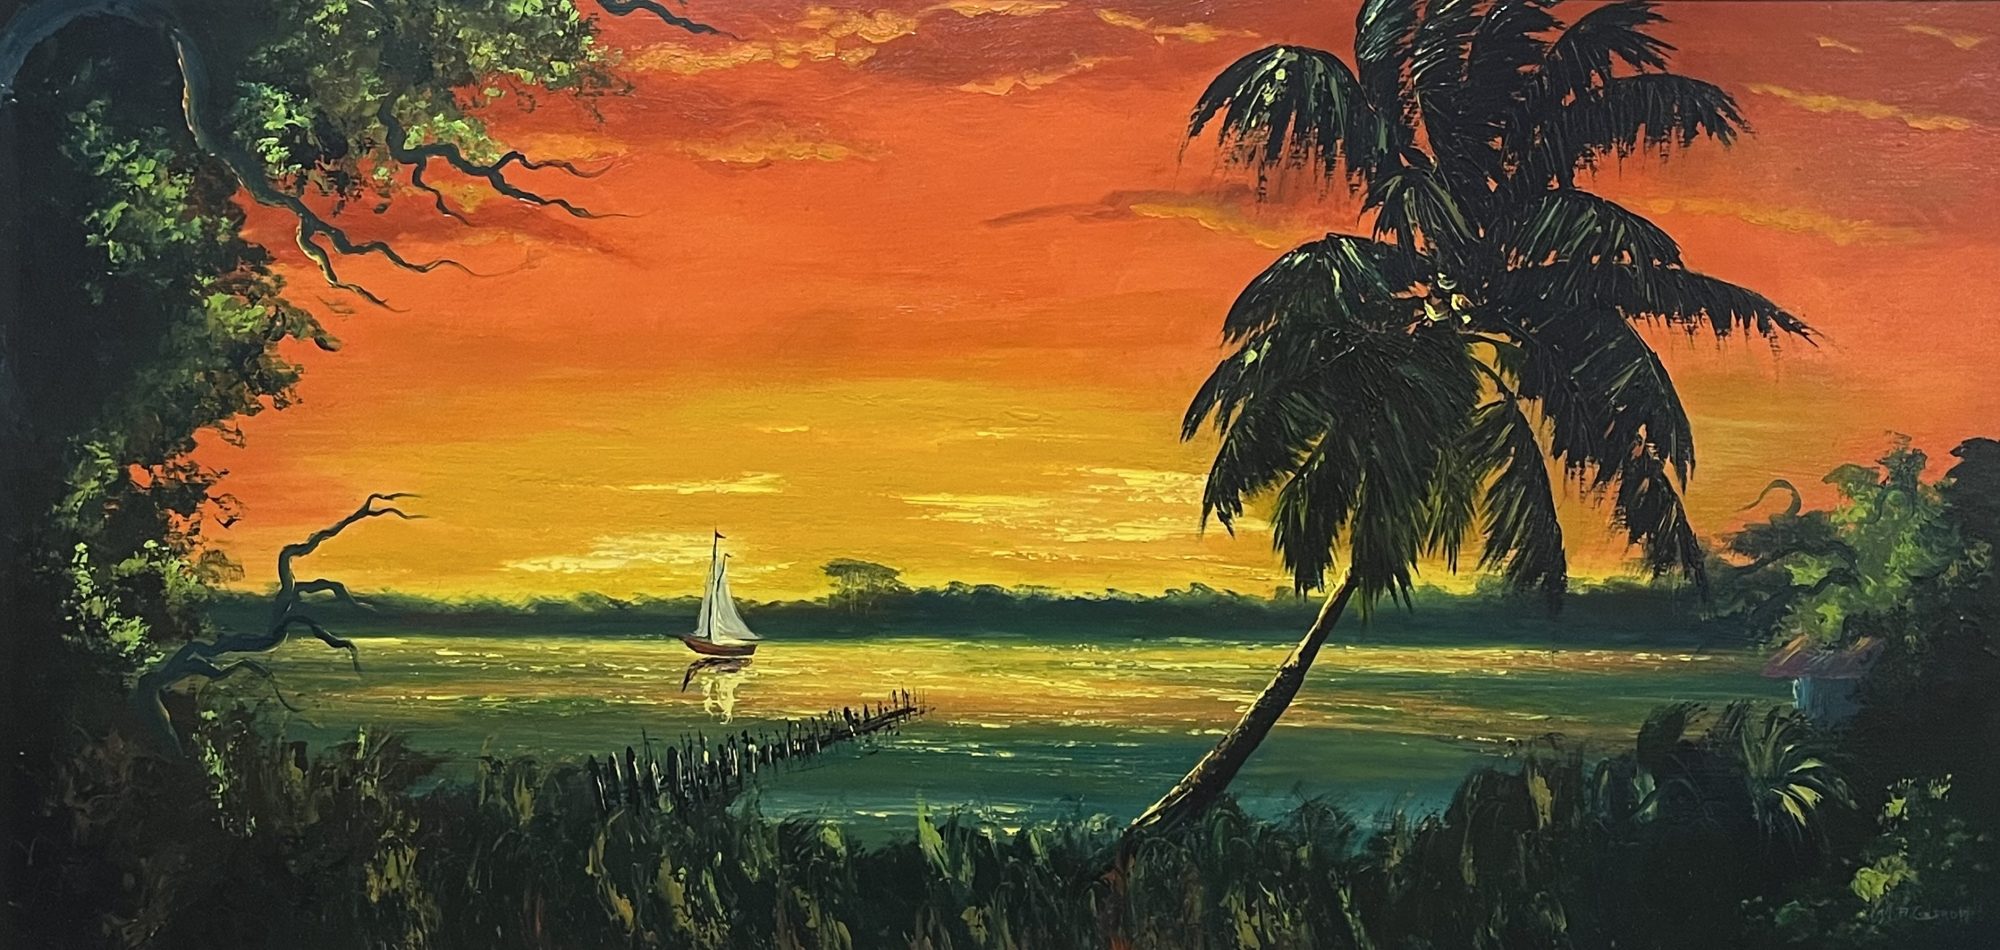 Fast Forward: The Original Florida Highwaymen on the Way to Fame